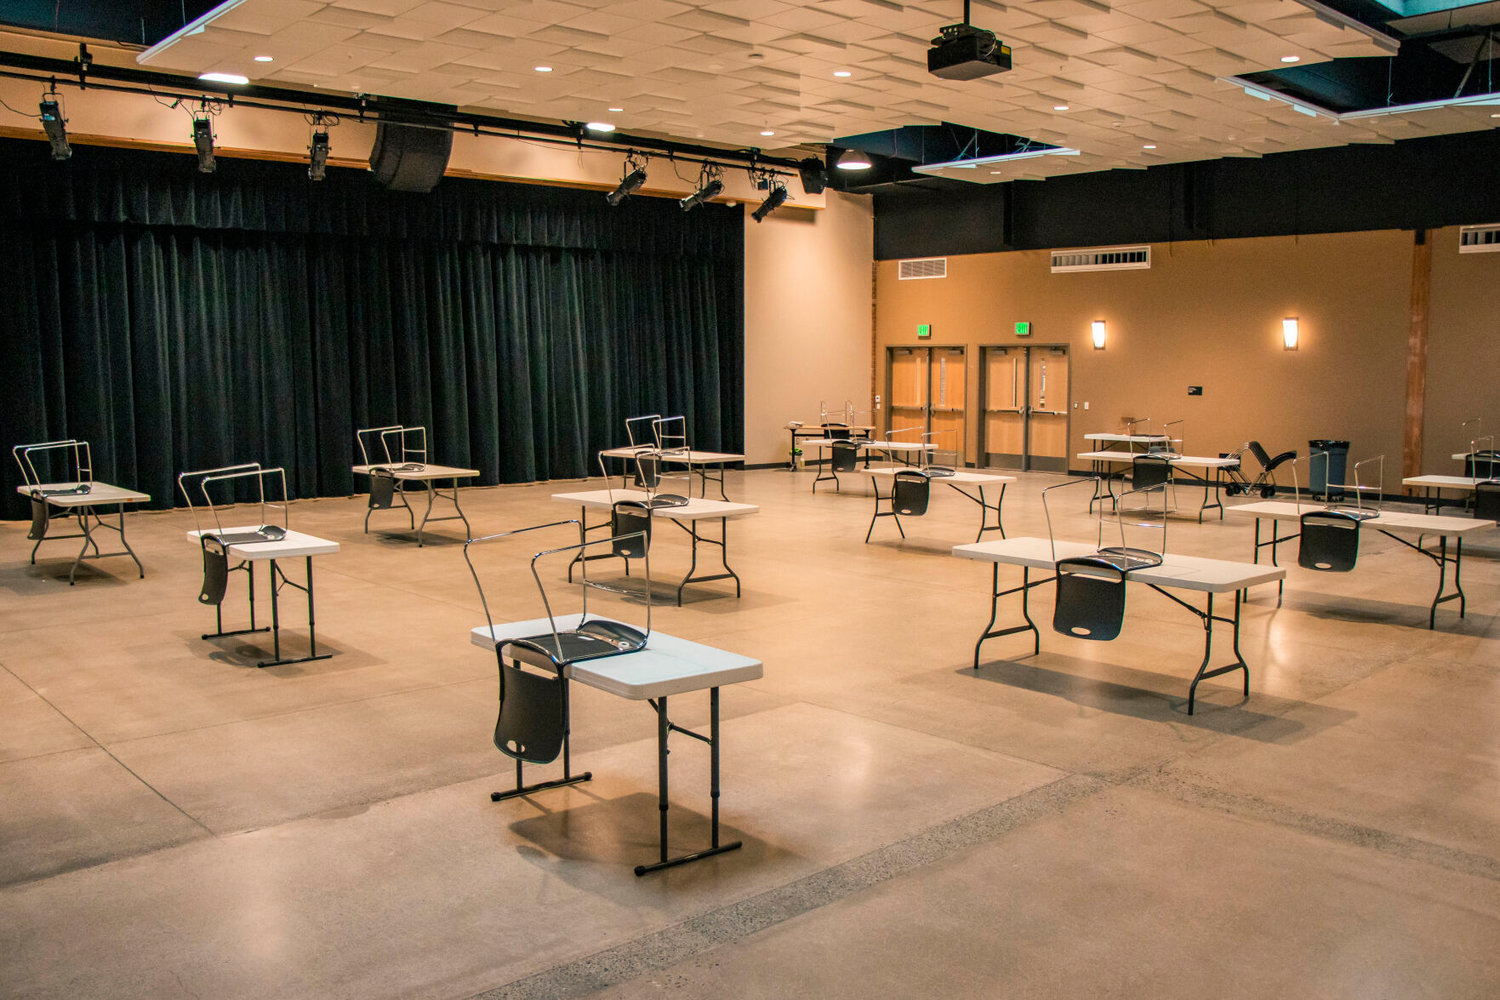 FILE PHOTO — Tables and chairs are separated to help prevent the spread of COVID-19 in a room where students can bring computers and work using Centralia High School’s Wi-Fi.